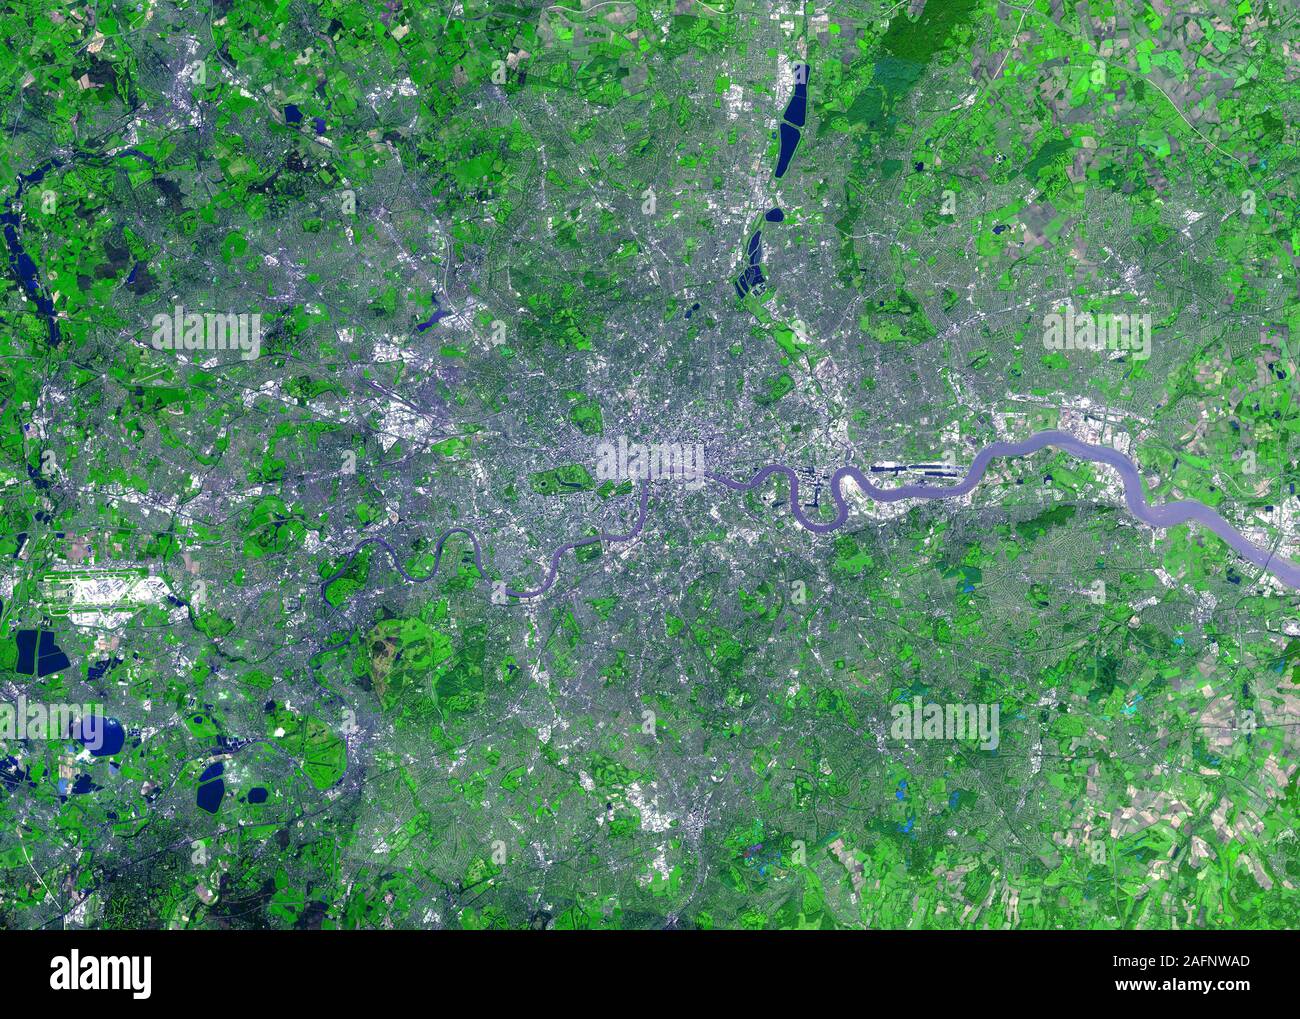 London and the River Thames, London, capital city of the United Kingdom, England Stock Photo